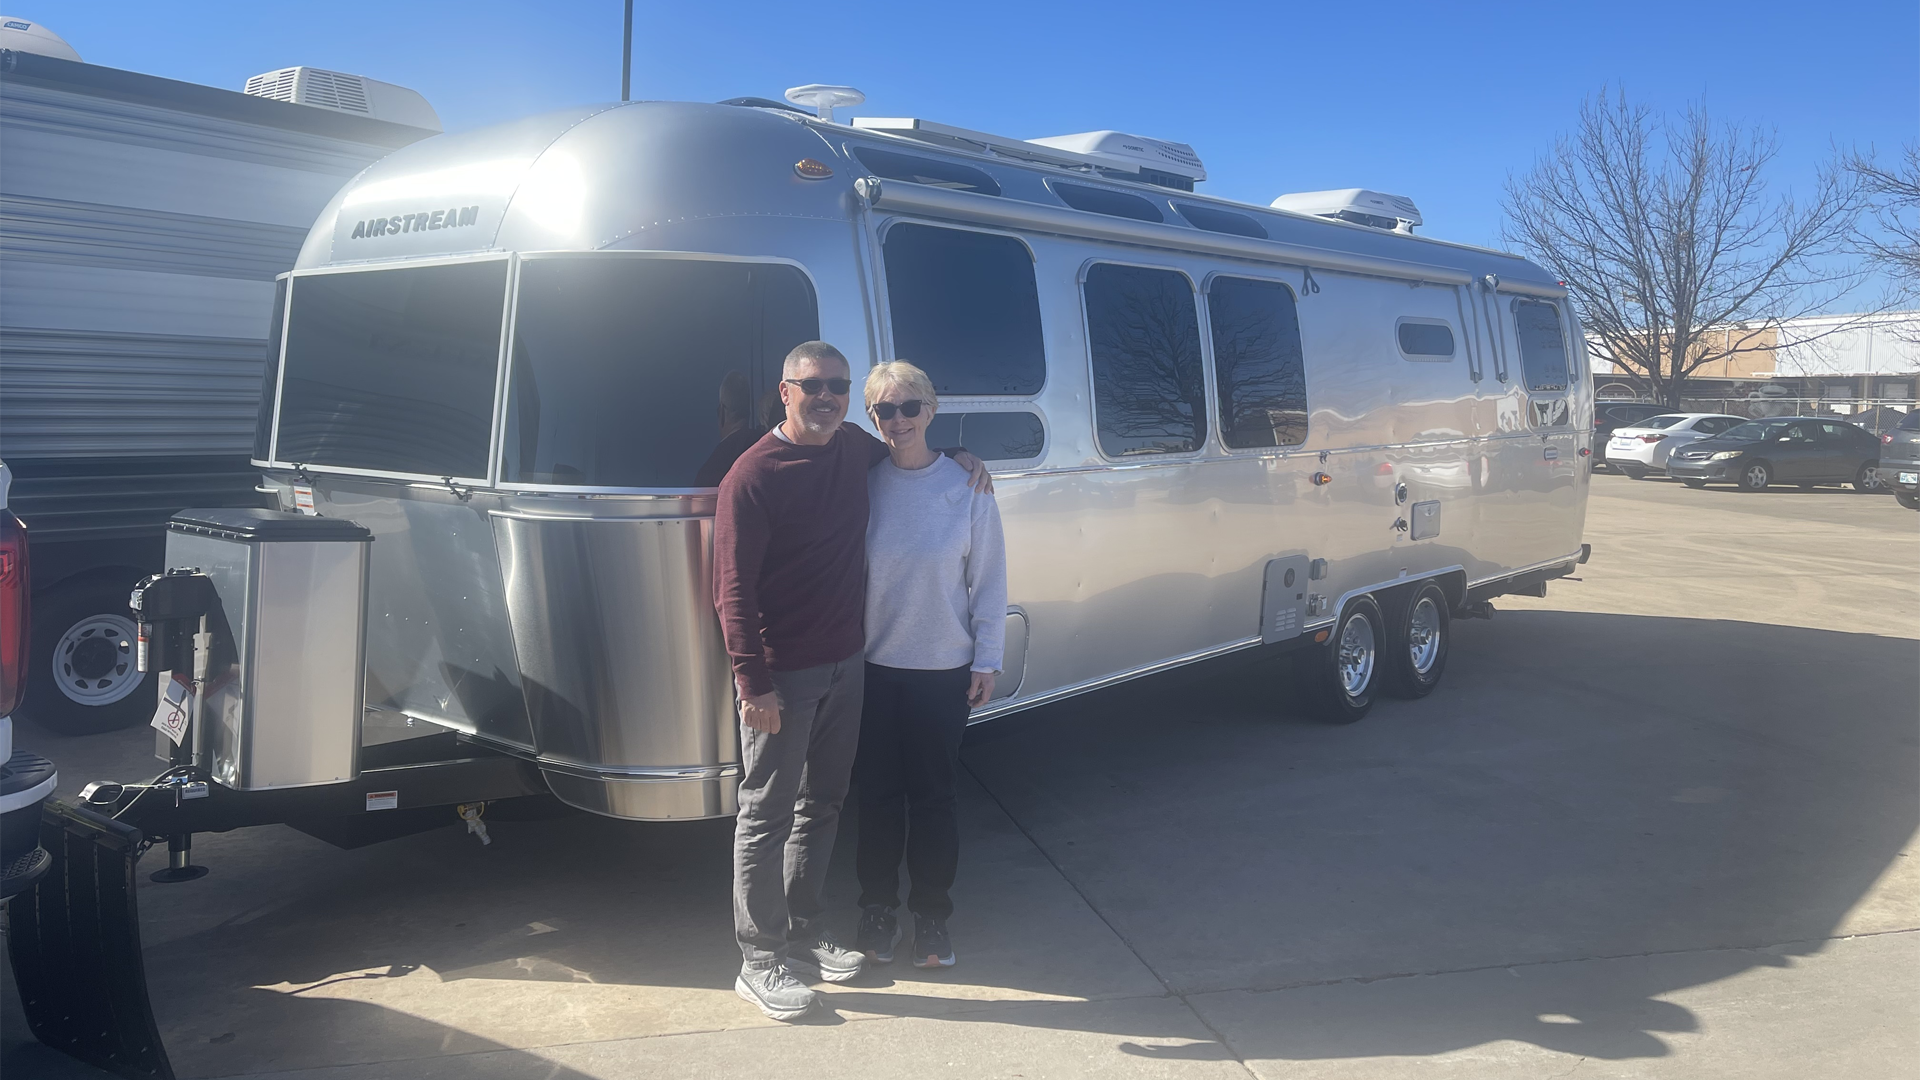 Jim and Susan smiling for a picture next to their new Airstream International Travel Trailer camper at the dealership.